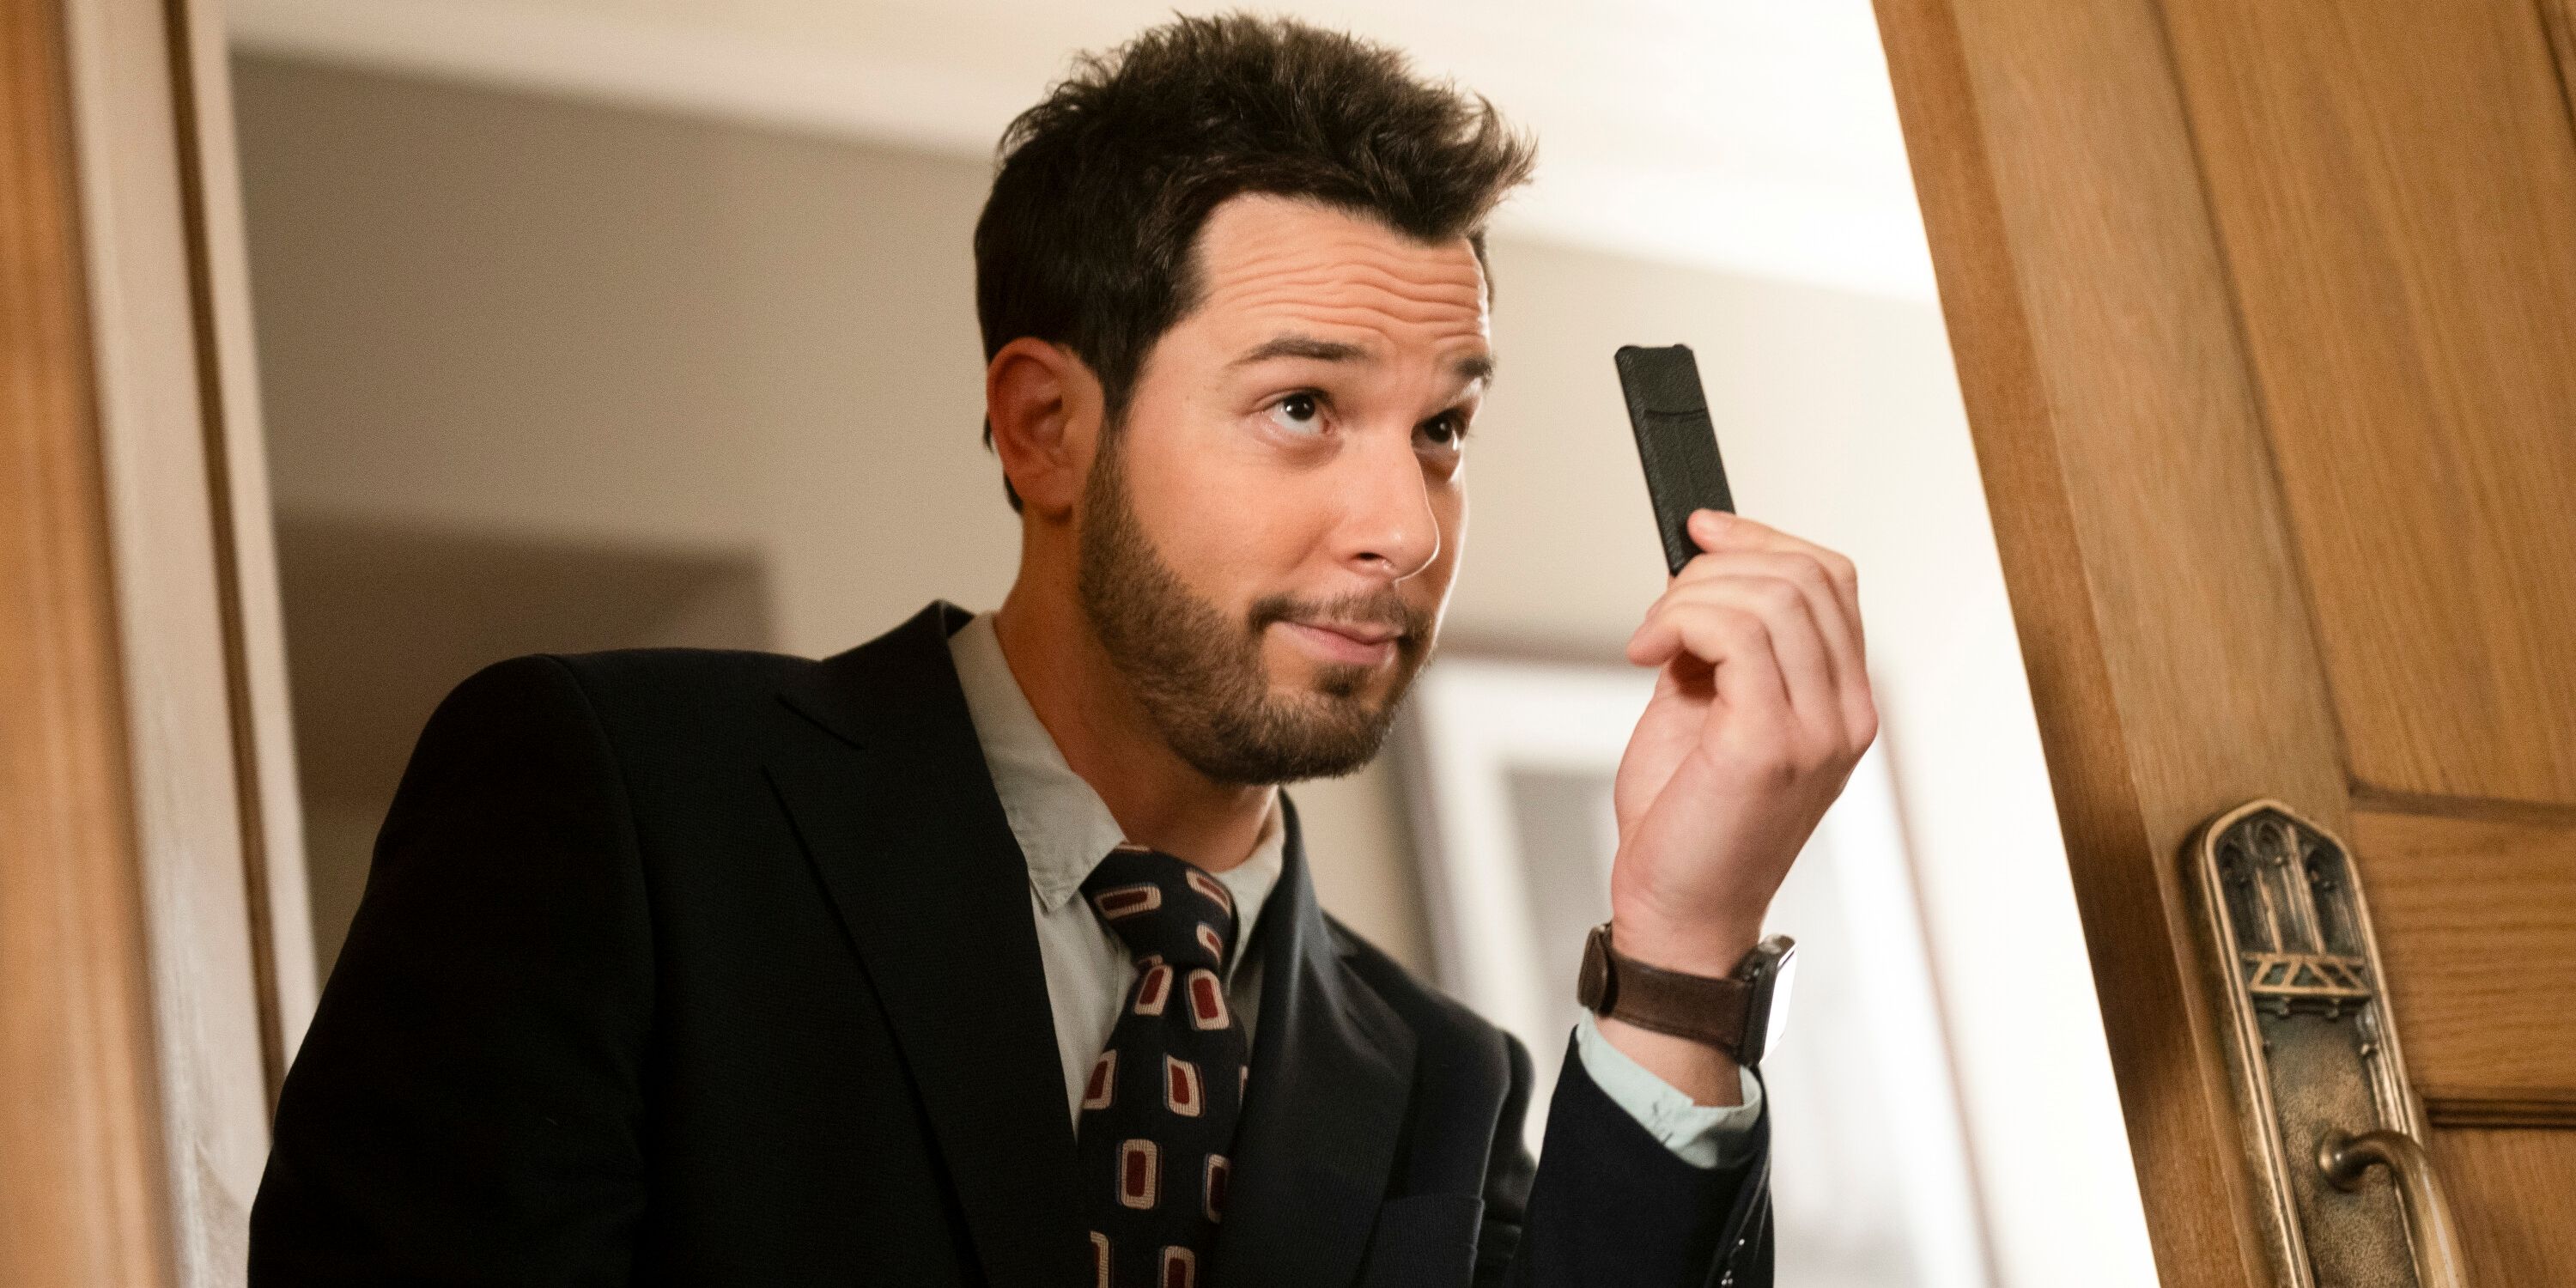 ‘So Help Me Todd’s Skylar Astin Teases Some Possible Romance in Season 2